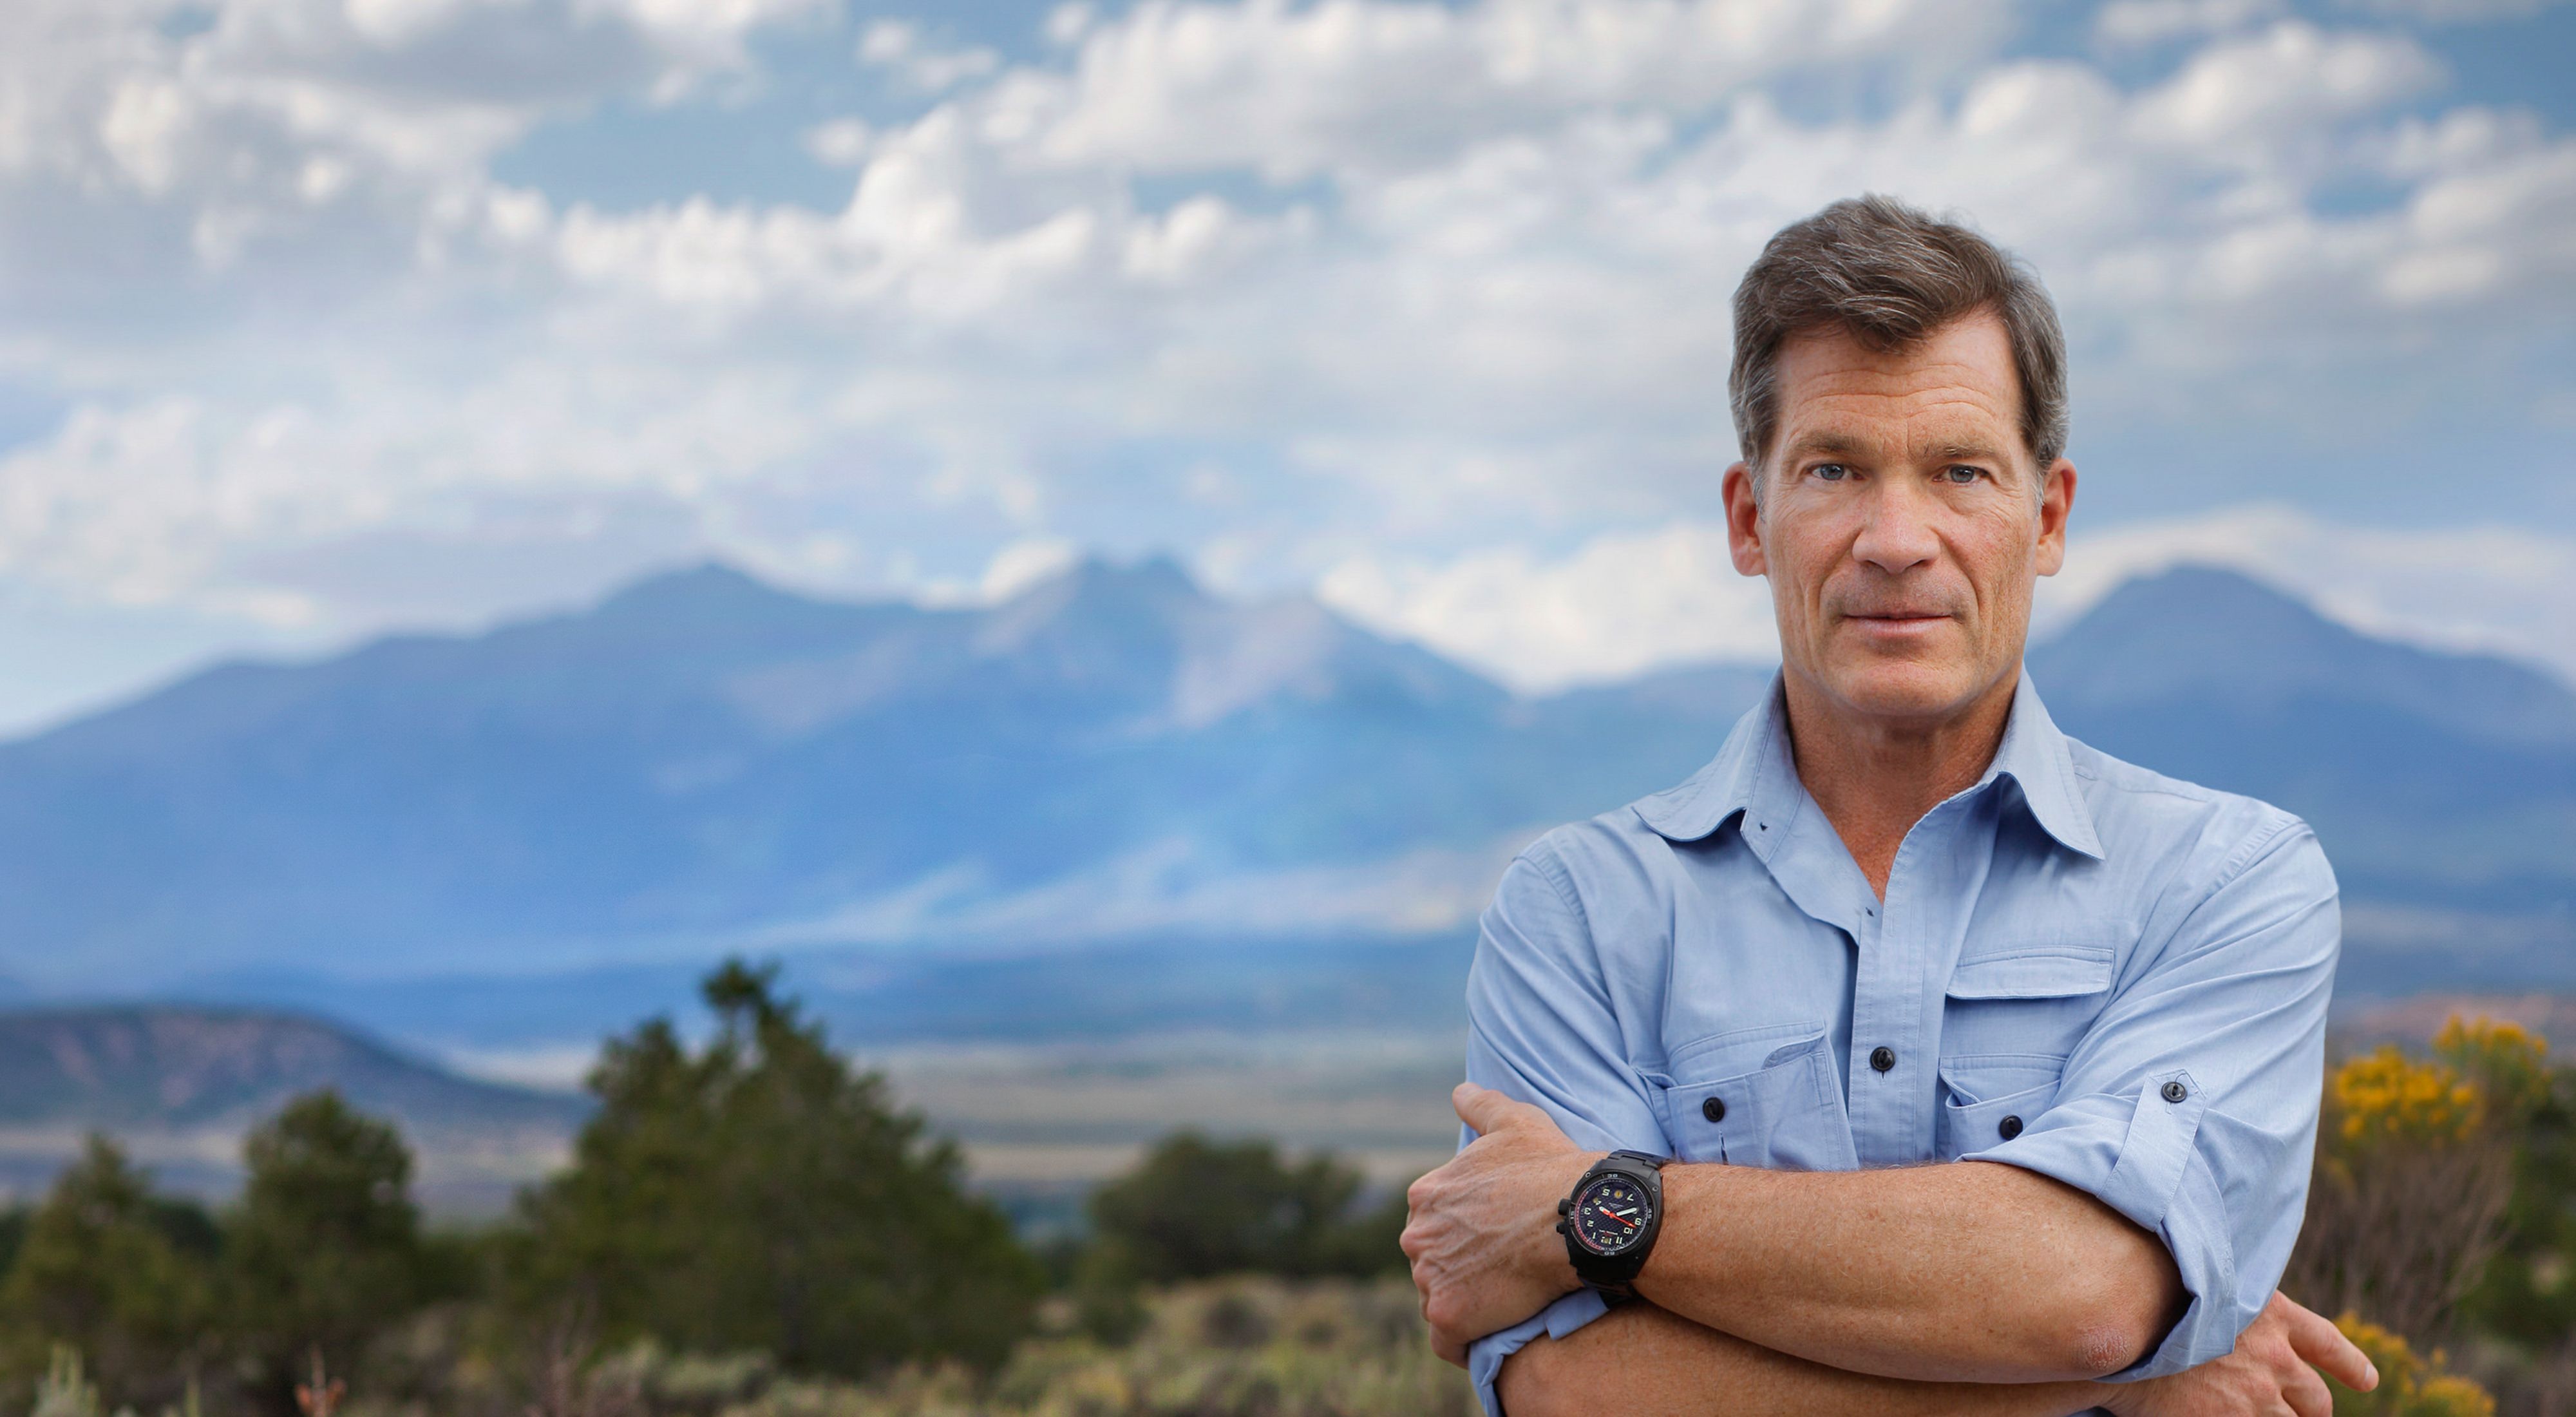 Man in light blue shirt stands with arms folded in front of mountain range.